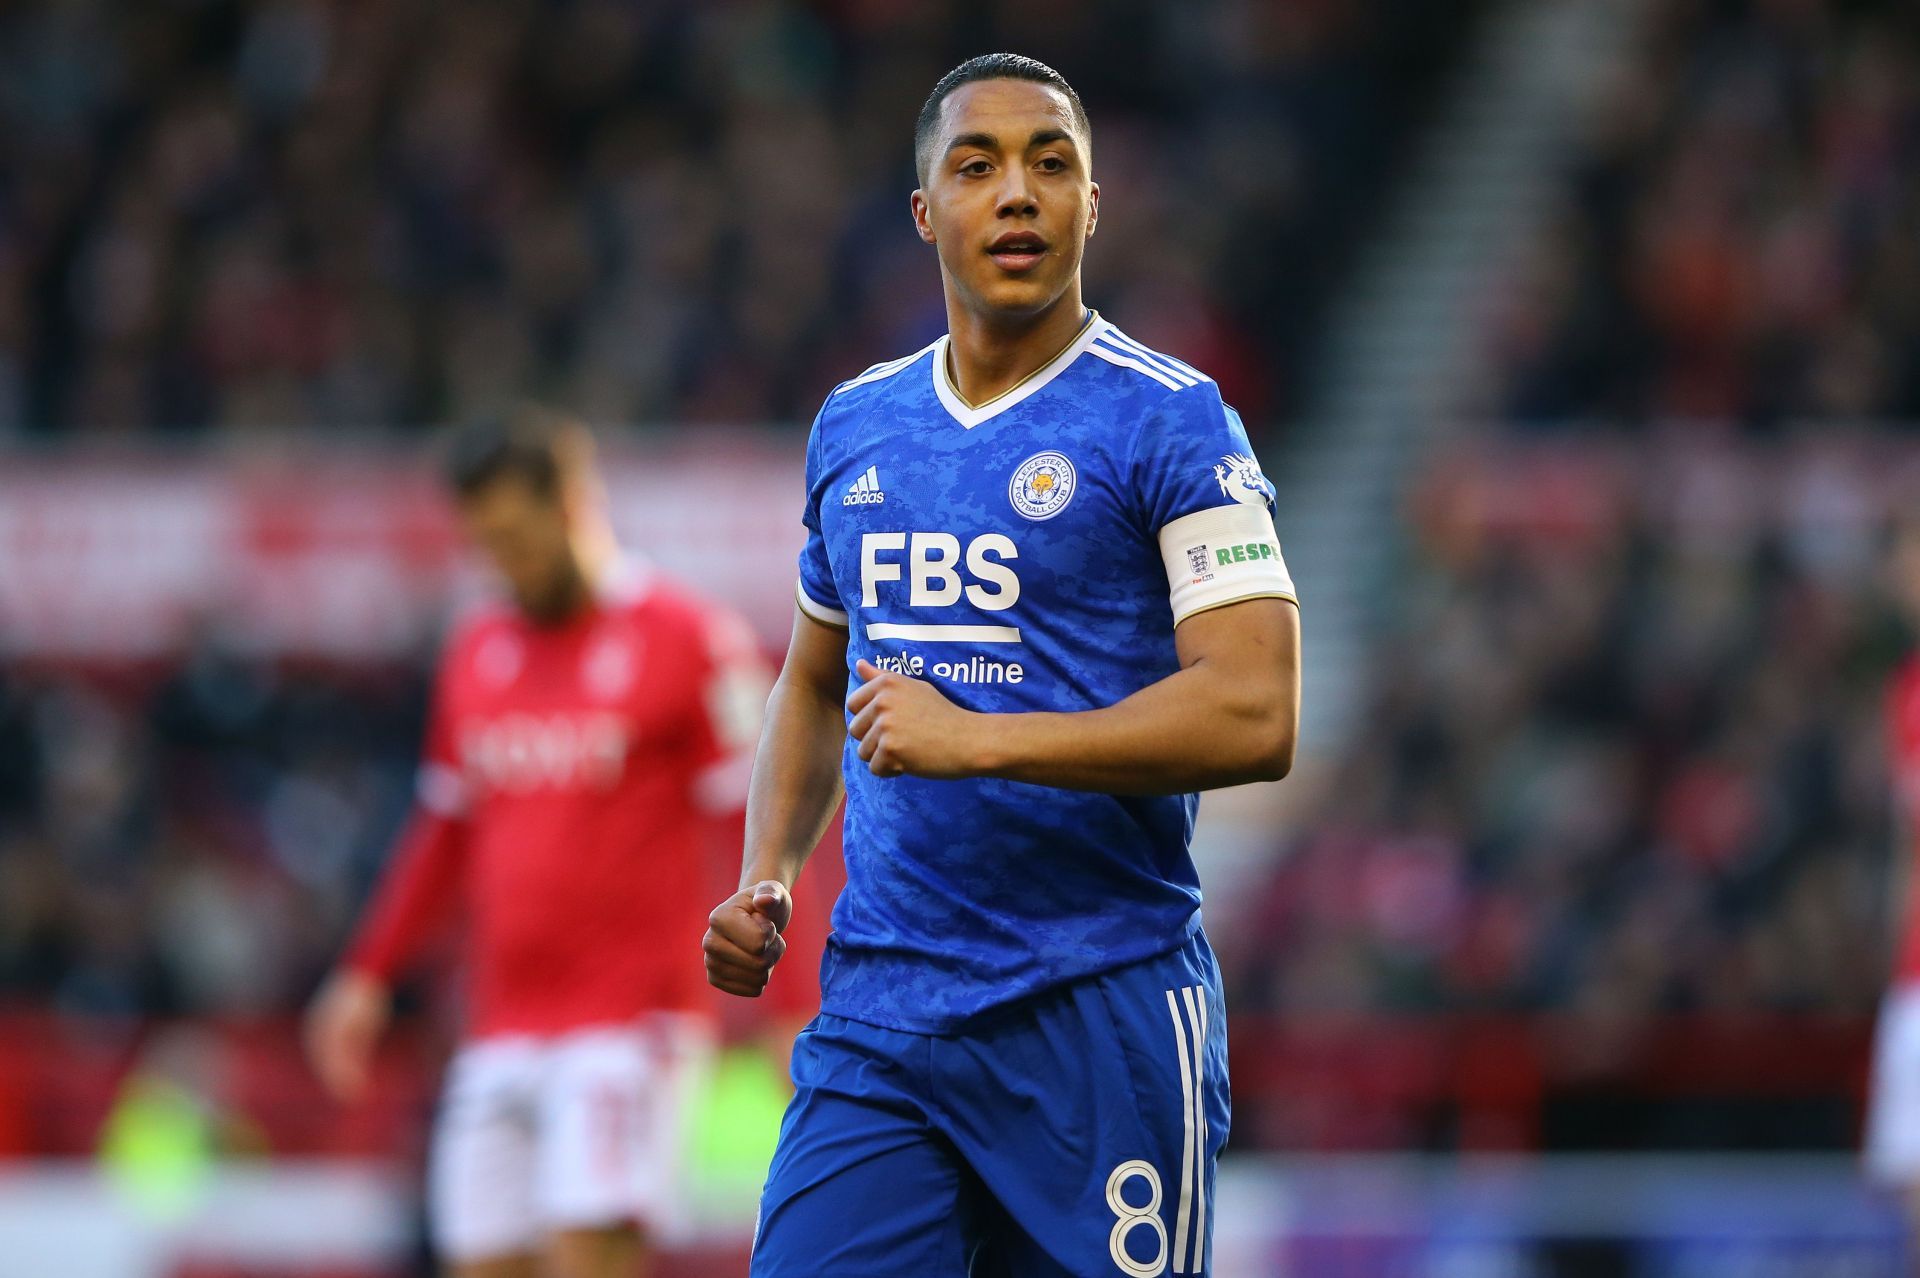 Kleberson has tipped Youri Tielemans (in pic) to join Chelsea.